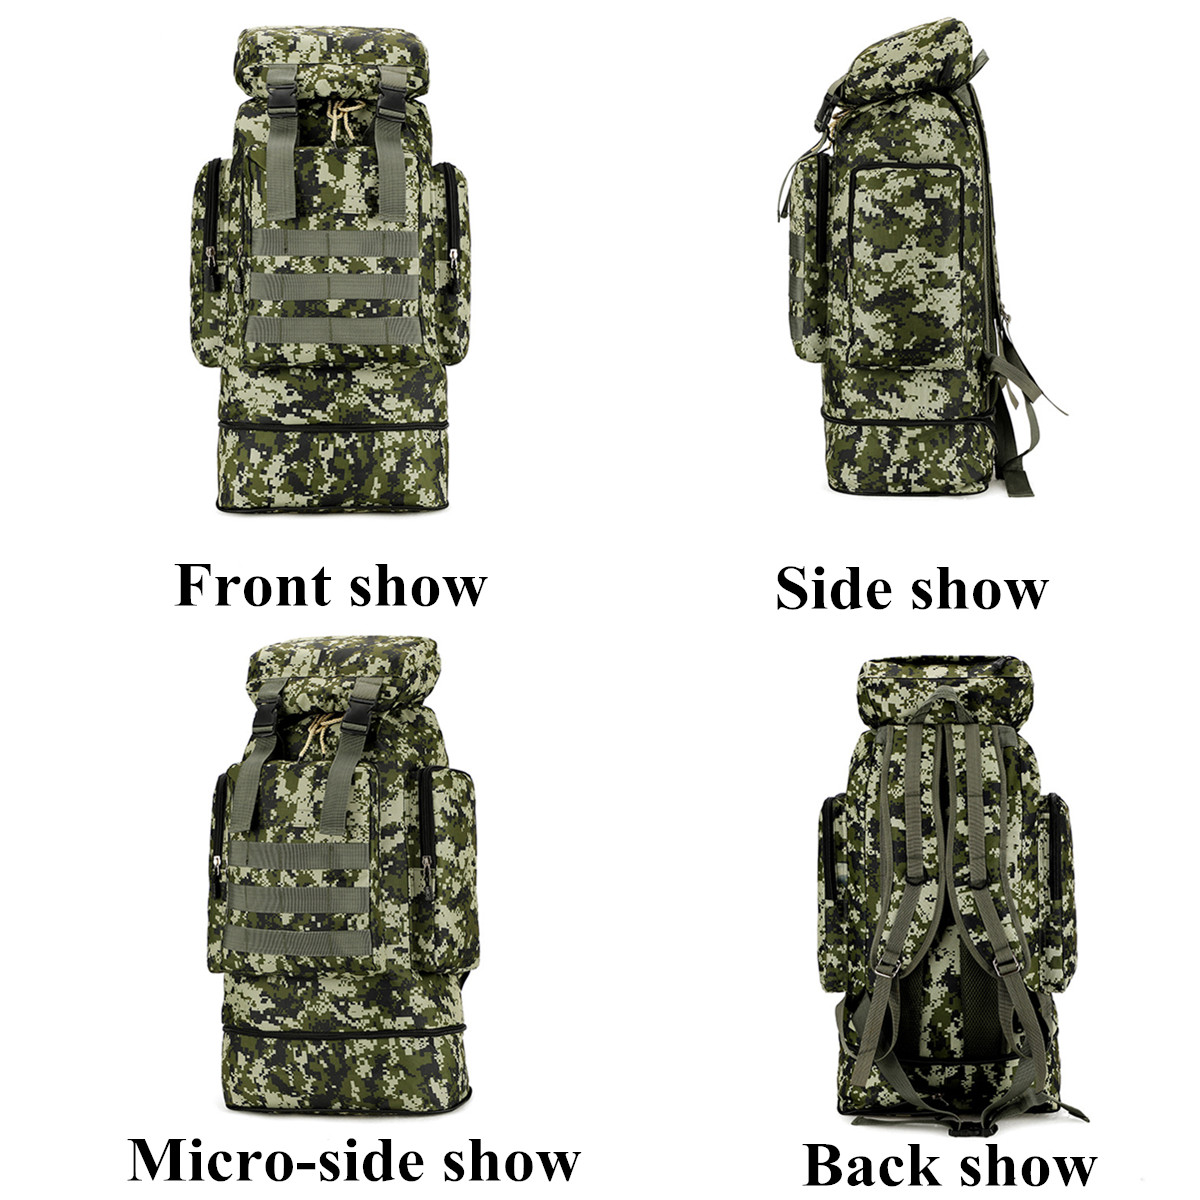 80L-Multi-Color-Large-Capacity-Waterproof-Tactical-Backpack-Outdoor-Travel-Hiking-Camping-Bag-1650714-5